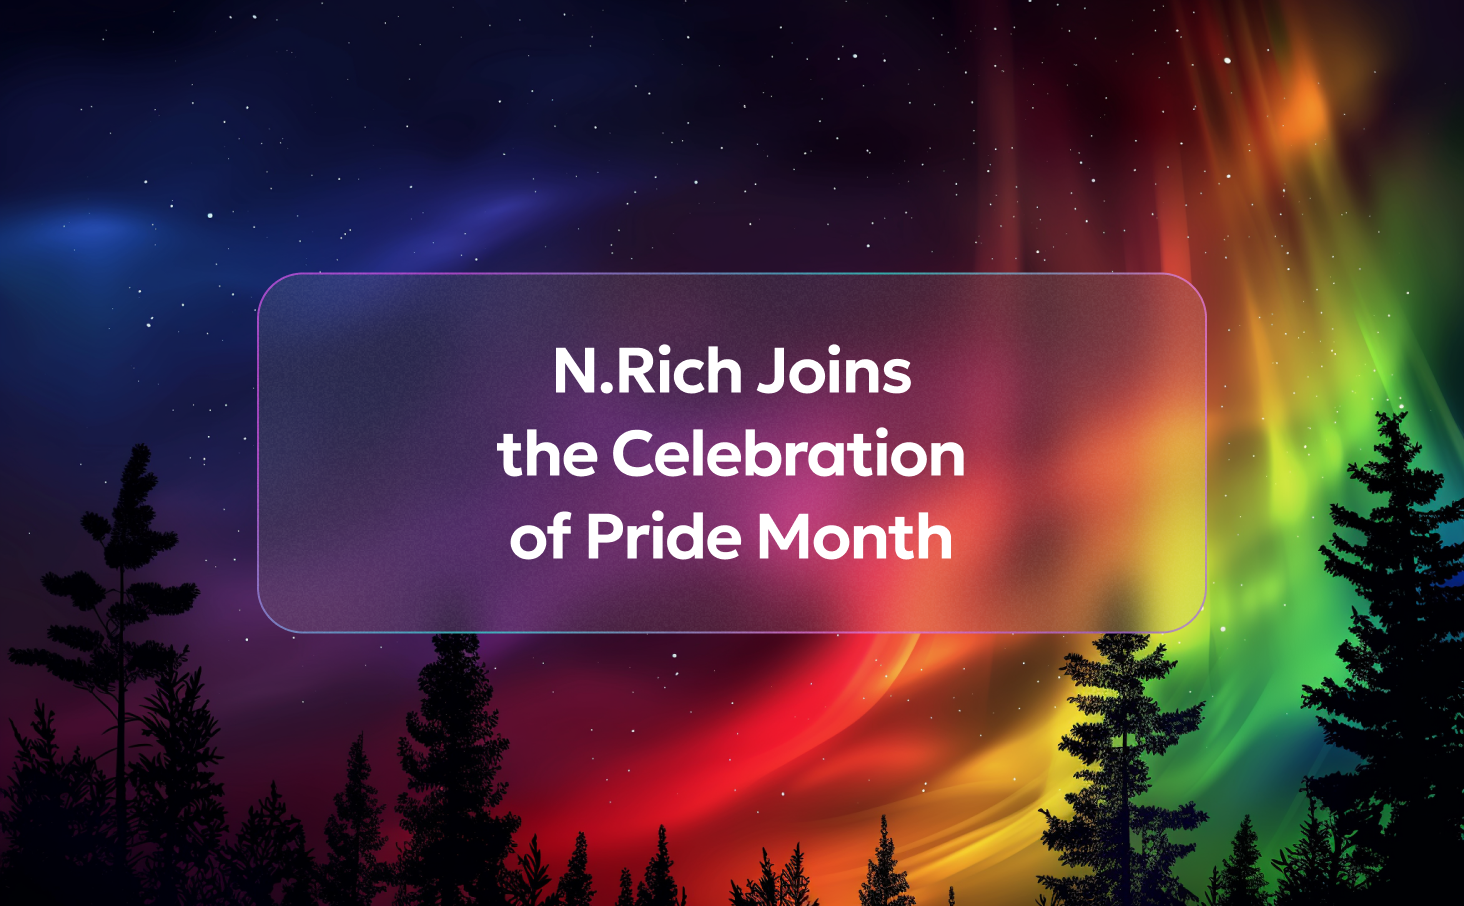 N.Rich Joins the Celebration of Pride Month